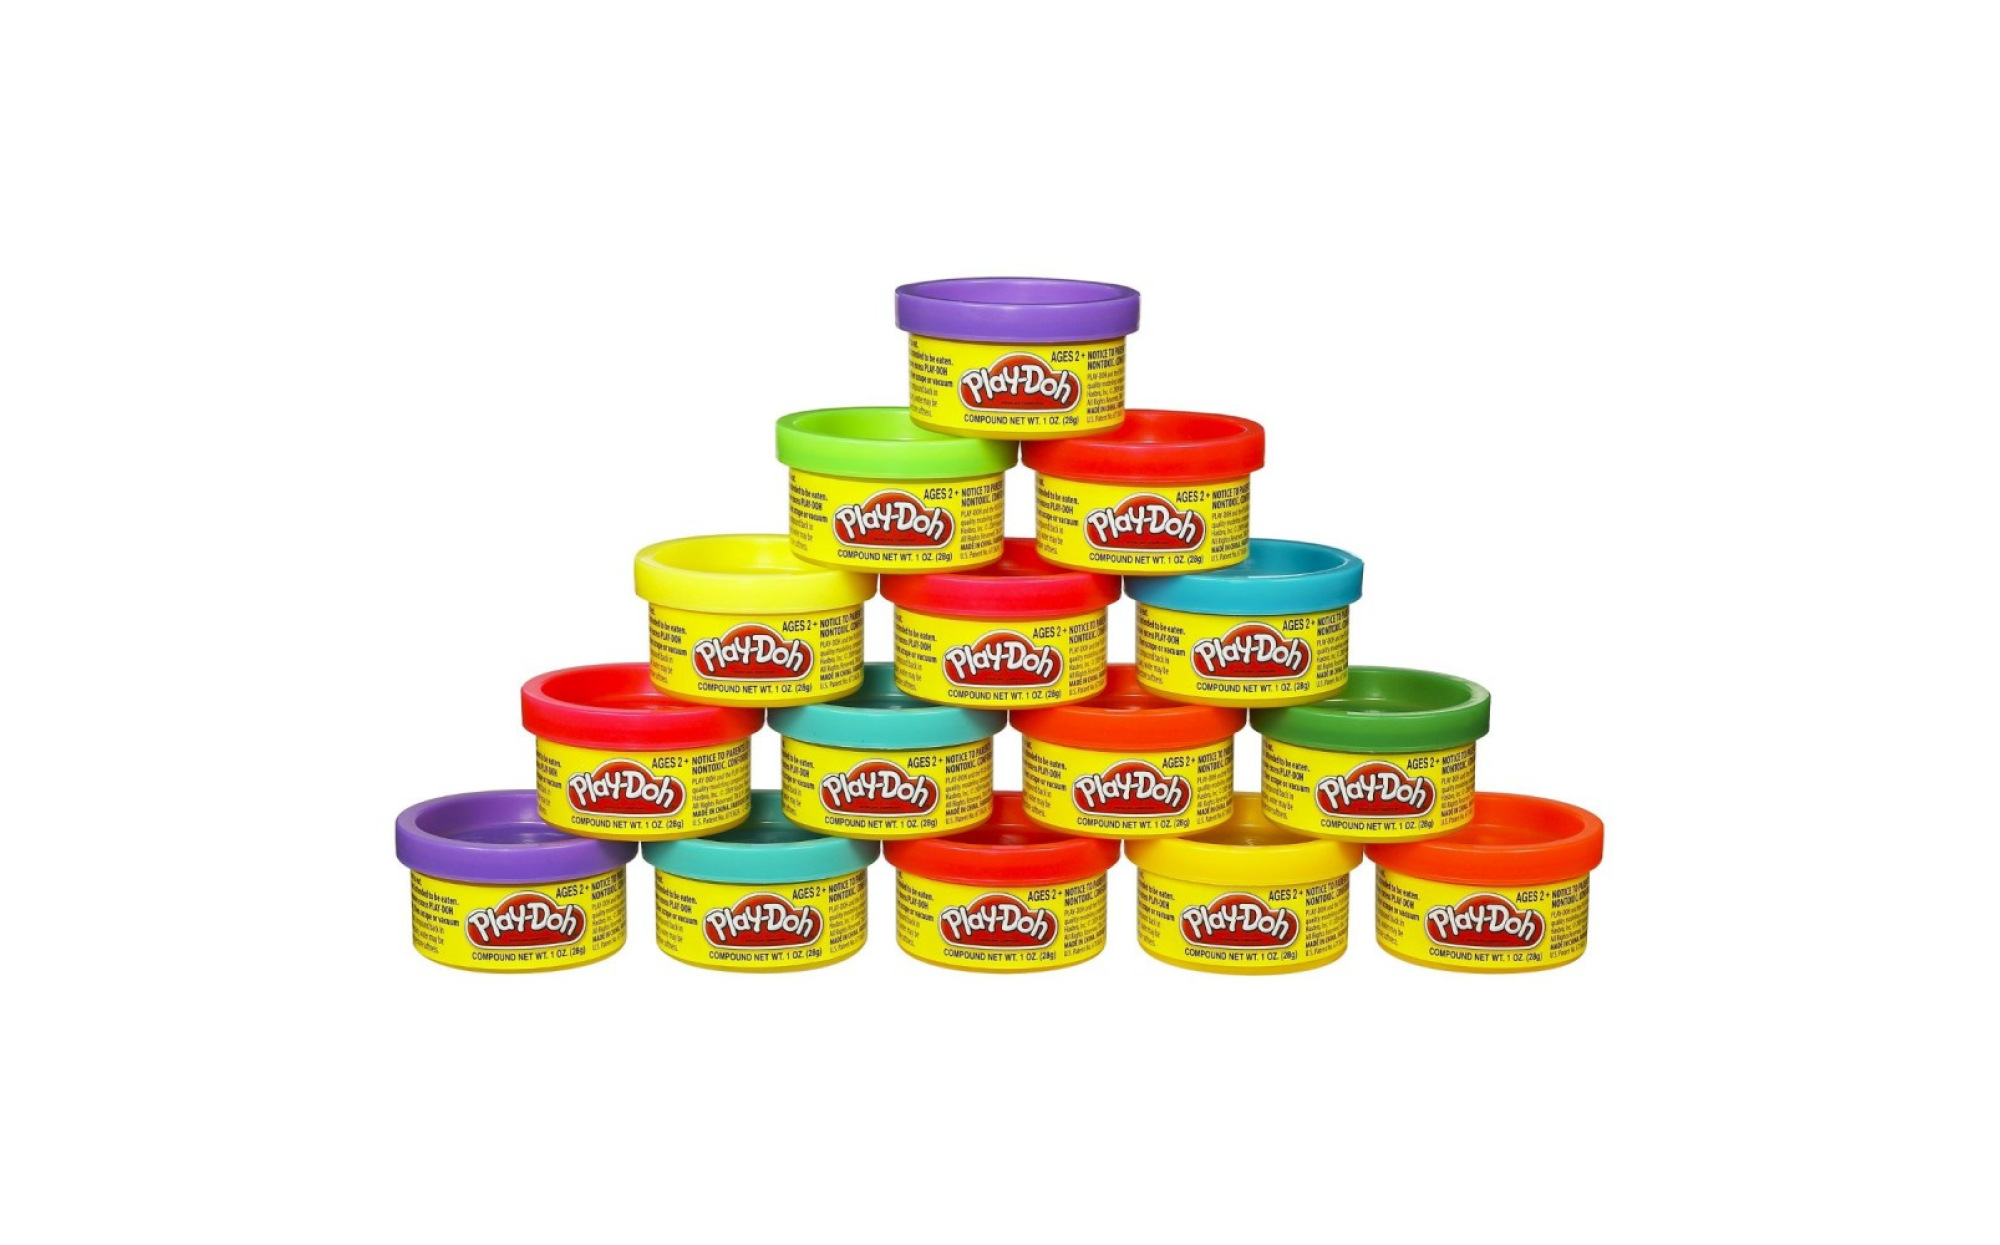 Play-Doh Party Pack (15 cans) – Art Therapy